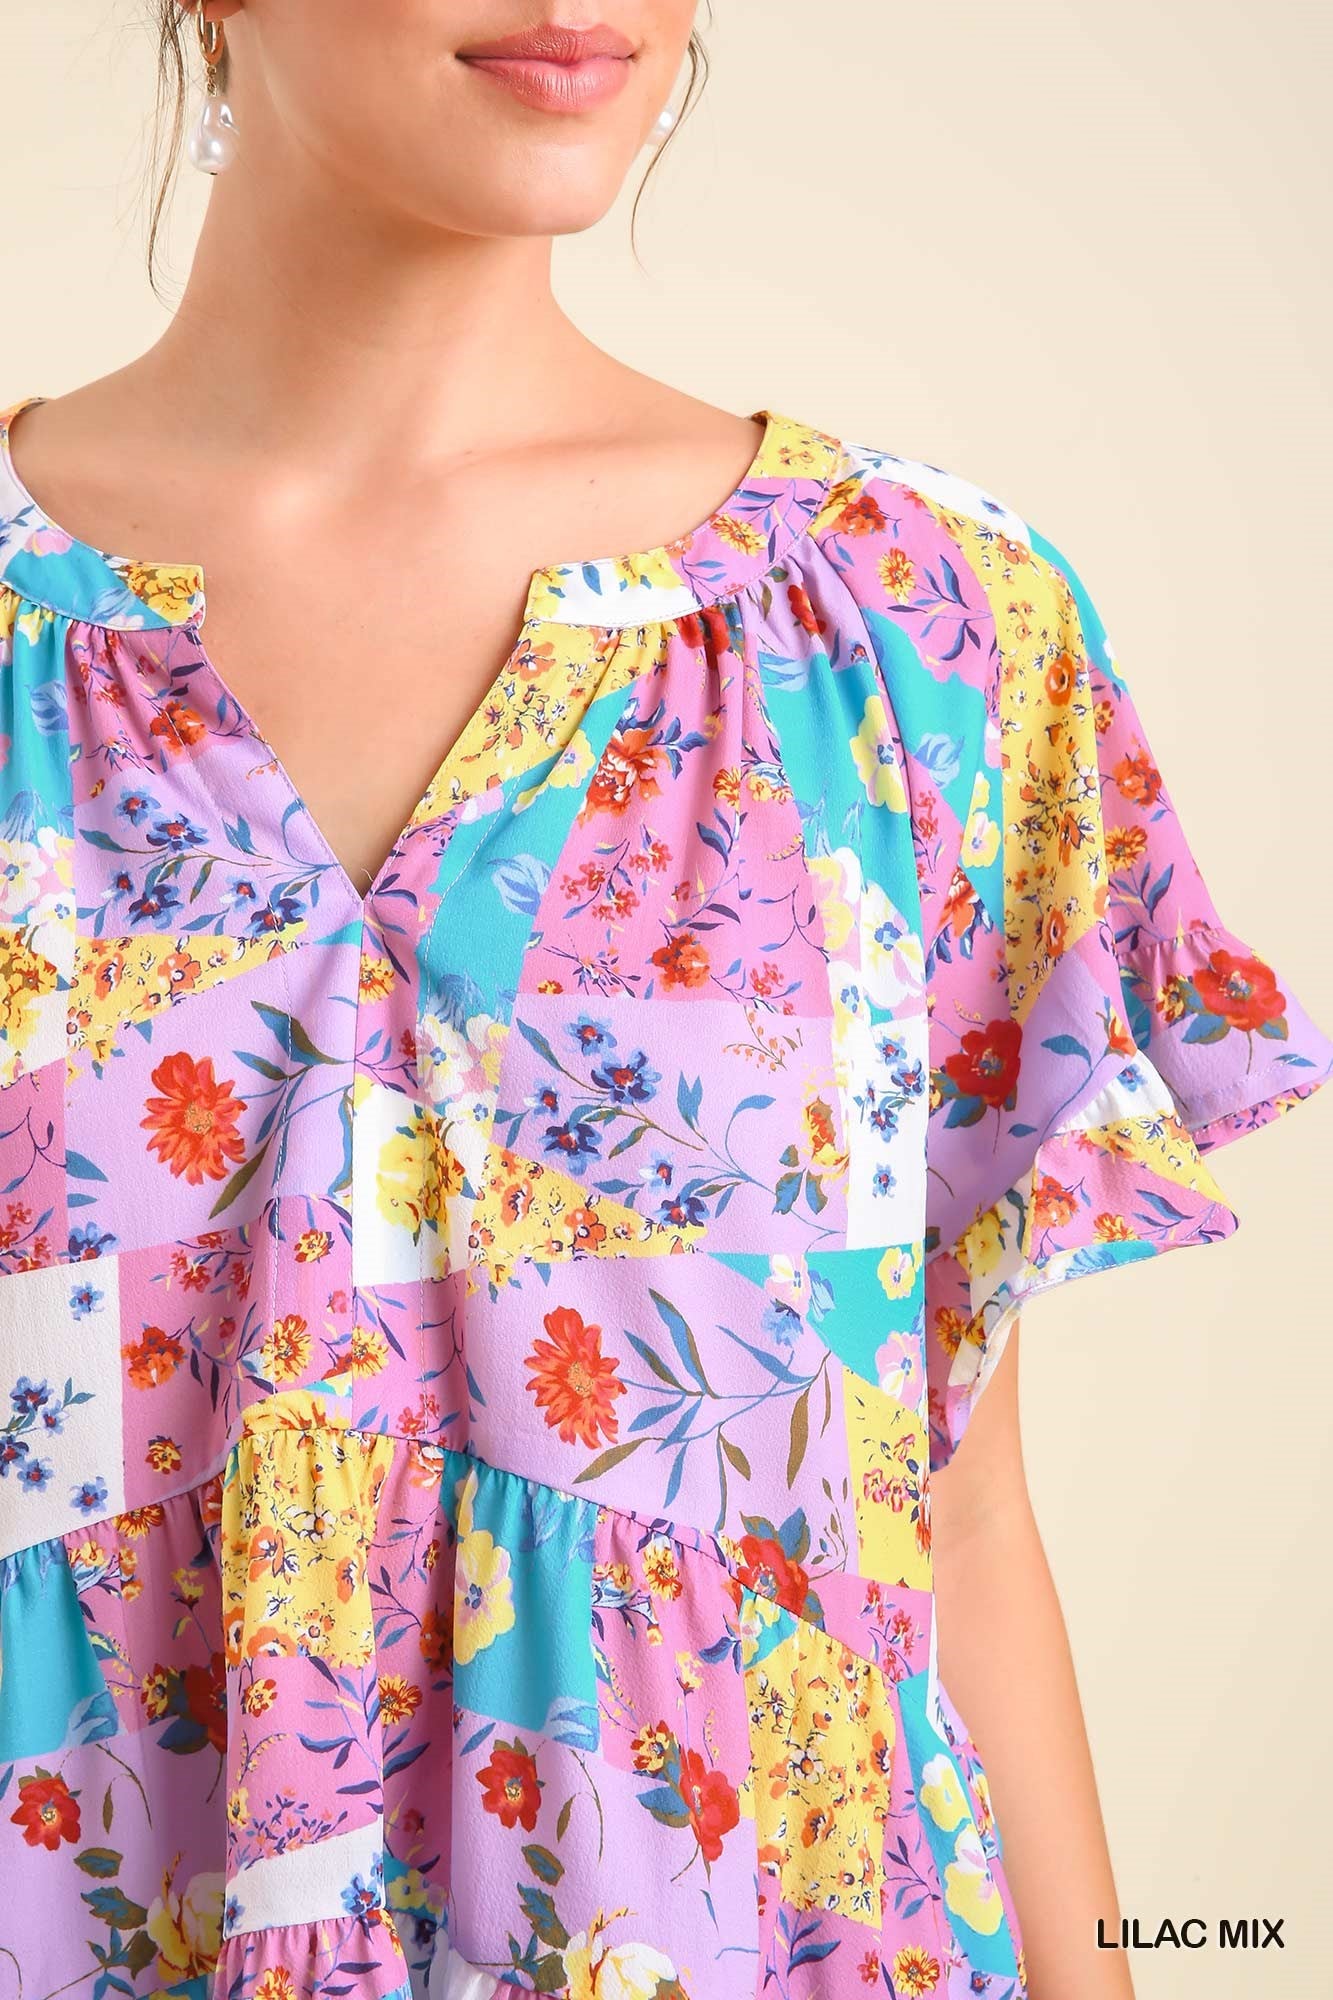 Umgee Mixed Print Split Neck No Lining Ruffled Short Sleeve Tops - Roulhac Fashion Boutique